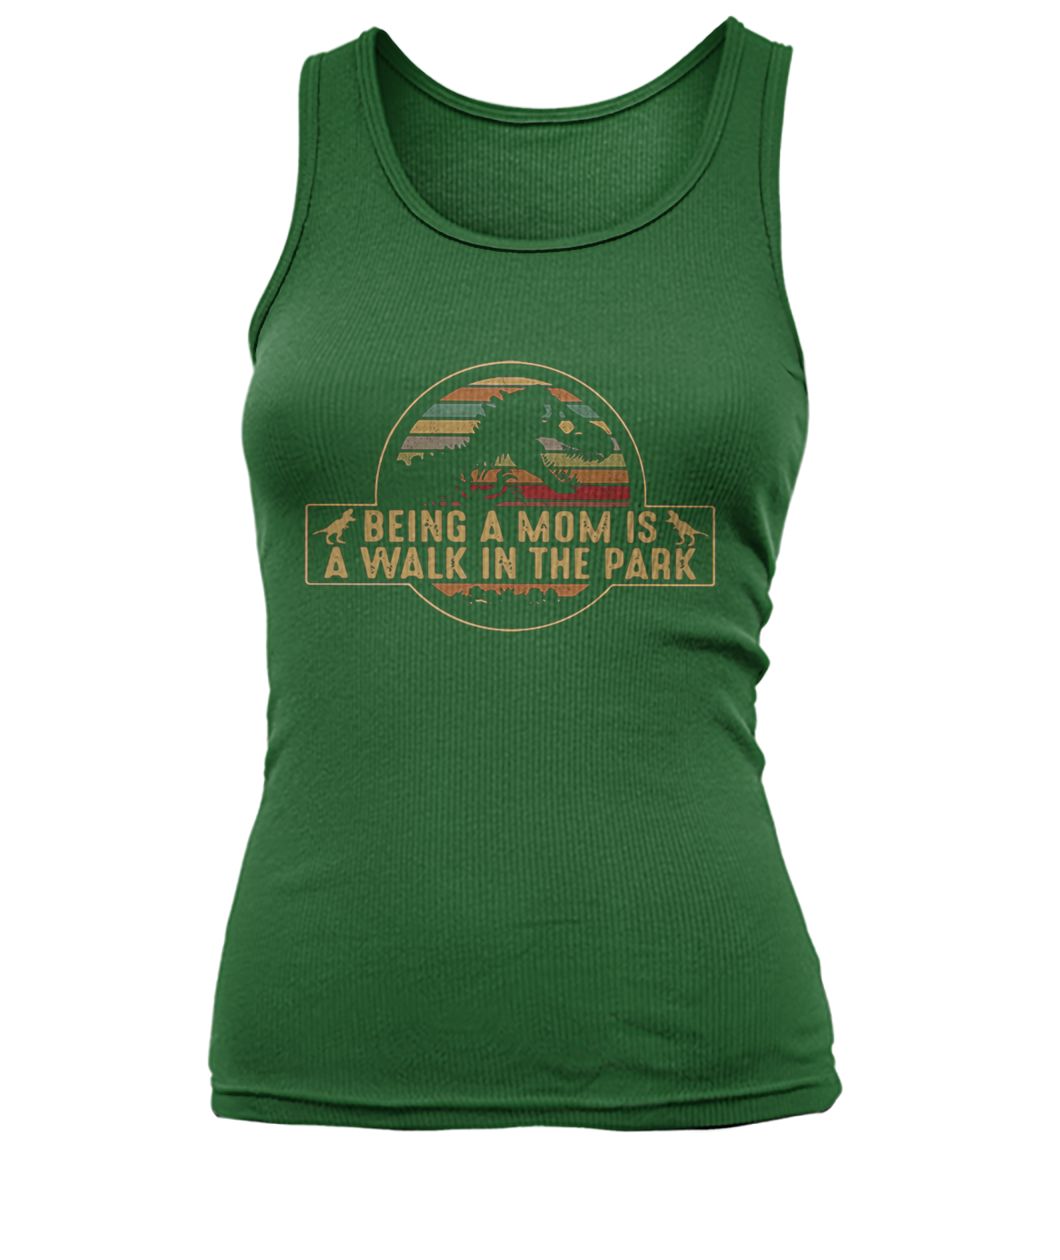 Dinosaurs being a mom is a walk in the park vintage women's tank top